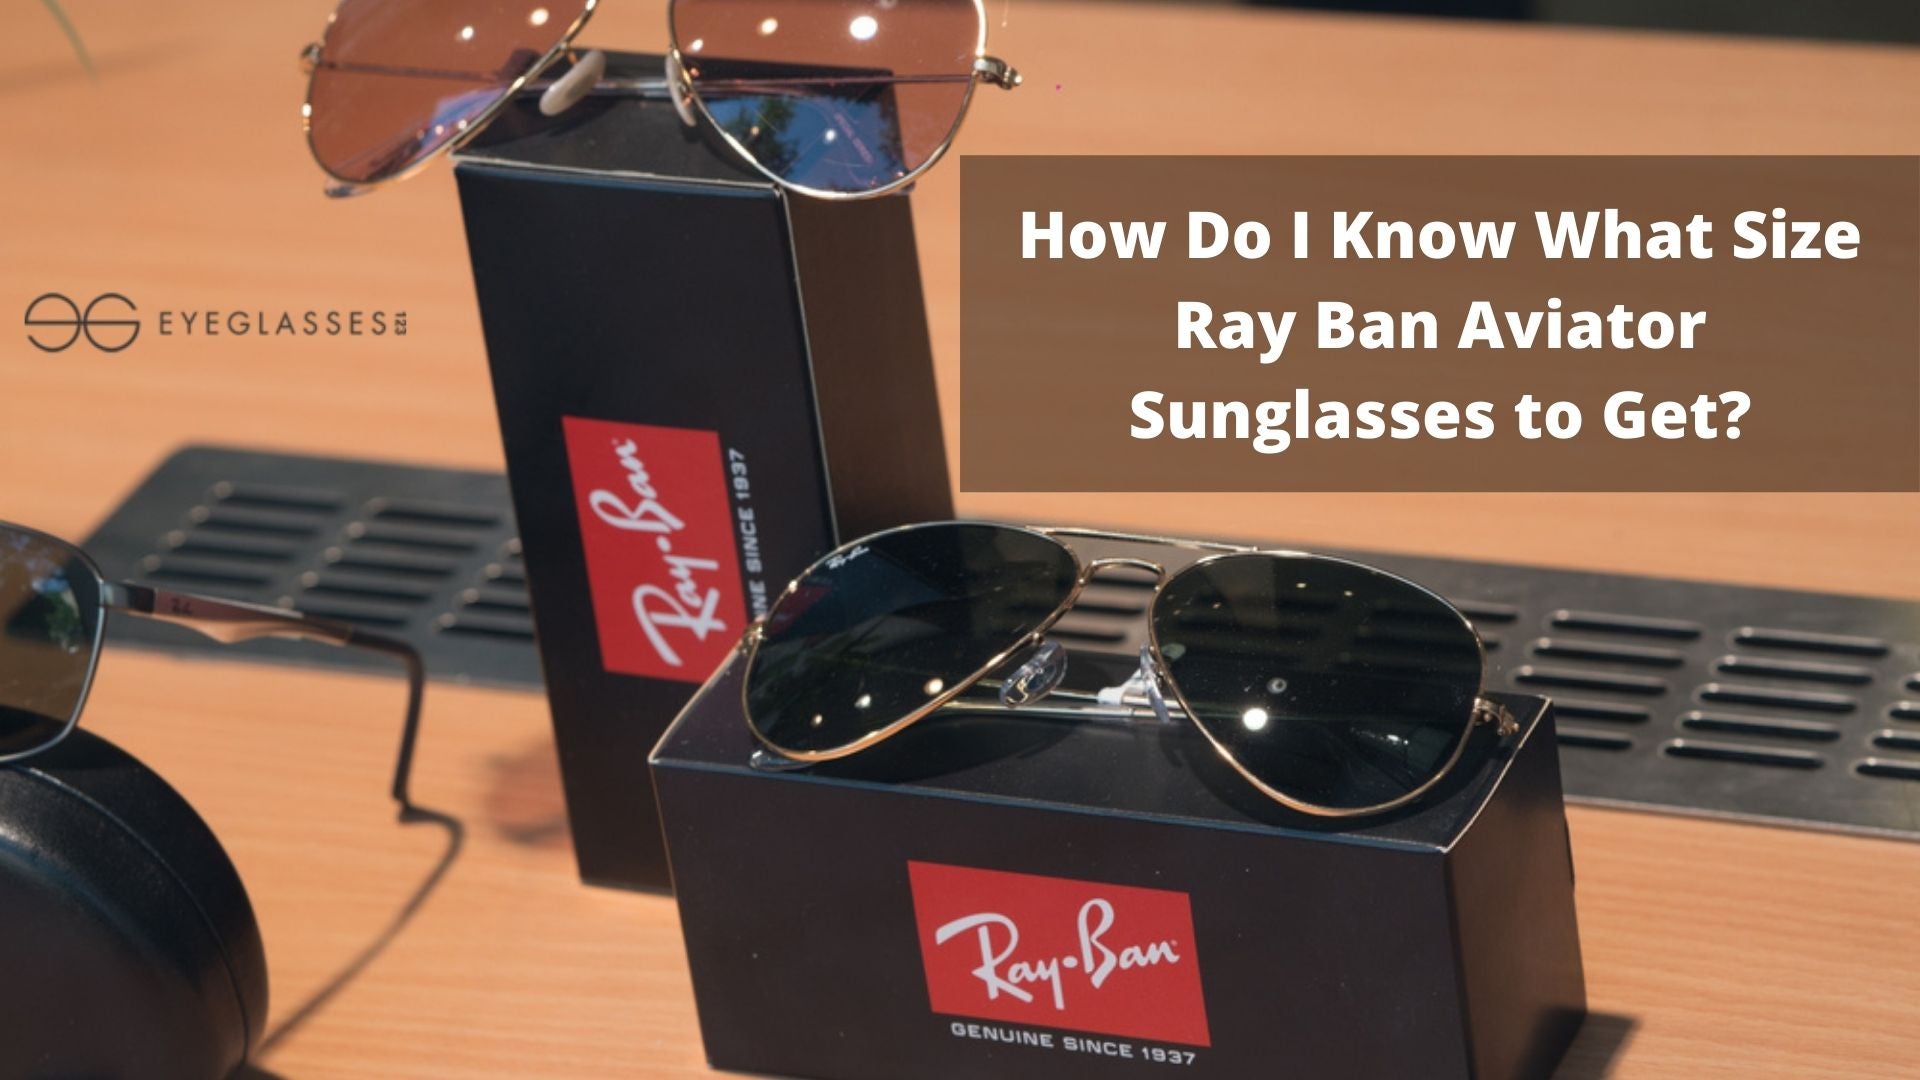 How Do I Know What Size Ray Ban Aviator Sunglasses to Get?